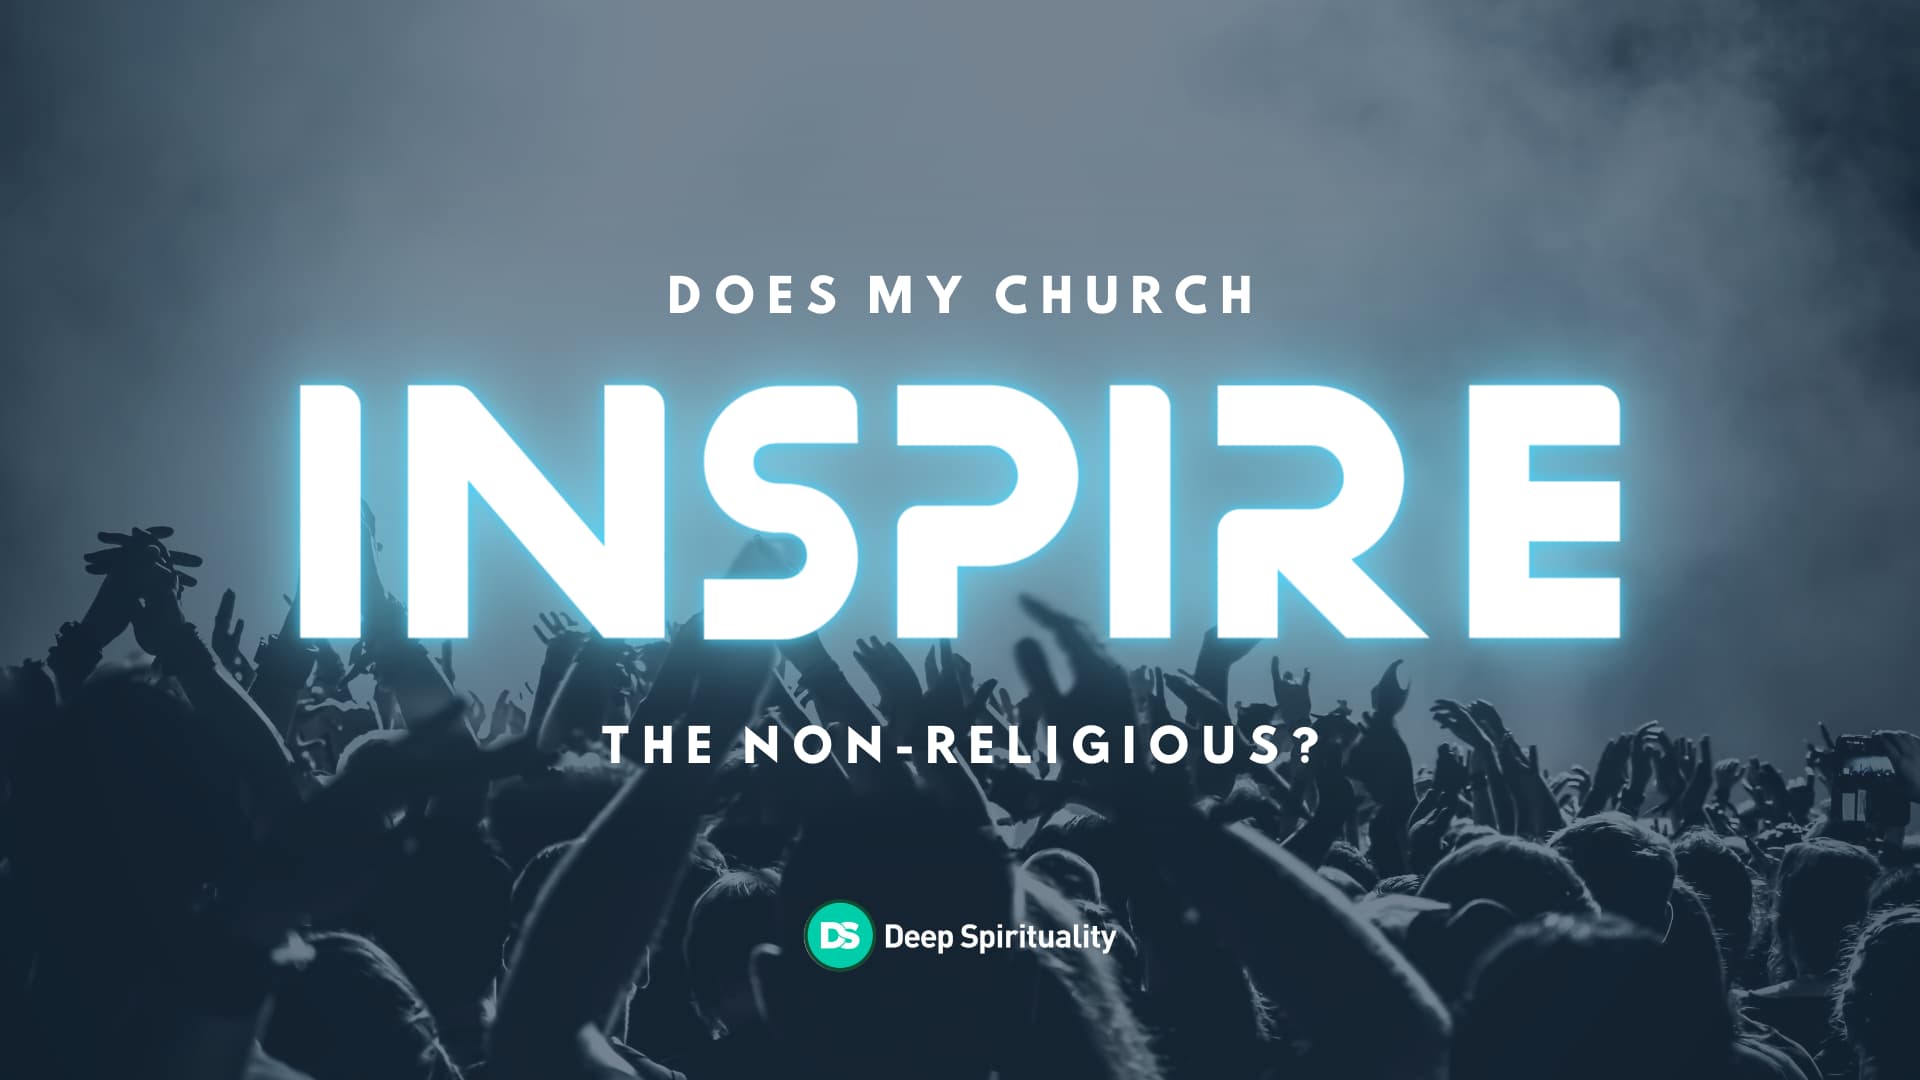 Does My Church Inspire the Non-Religious? 4